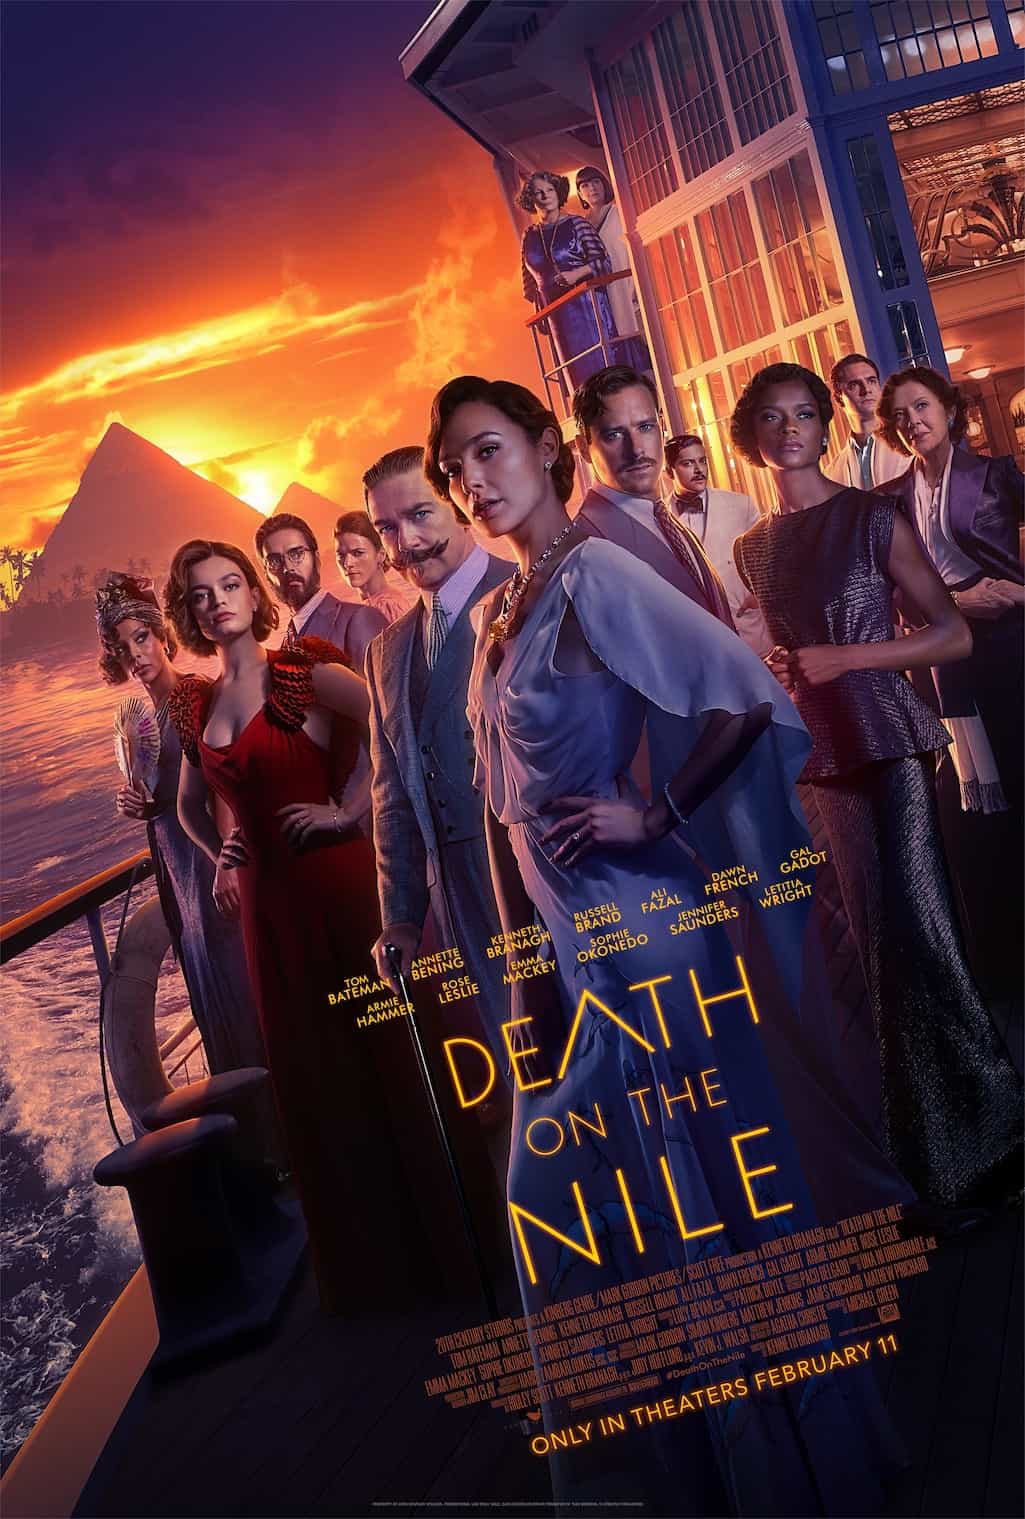 New trailer and poster for Death On The Nile starring Gal Gadot and directed by Kenneth Branagh - movie release date 23rd October 2020